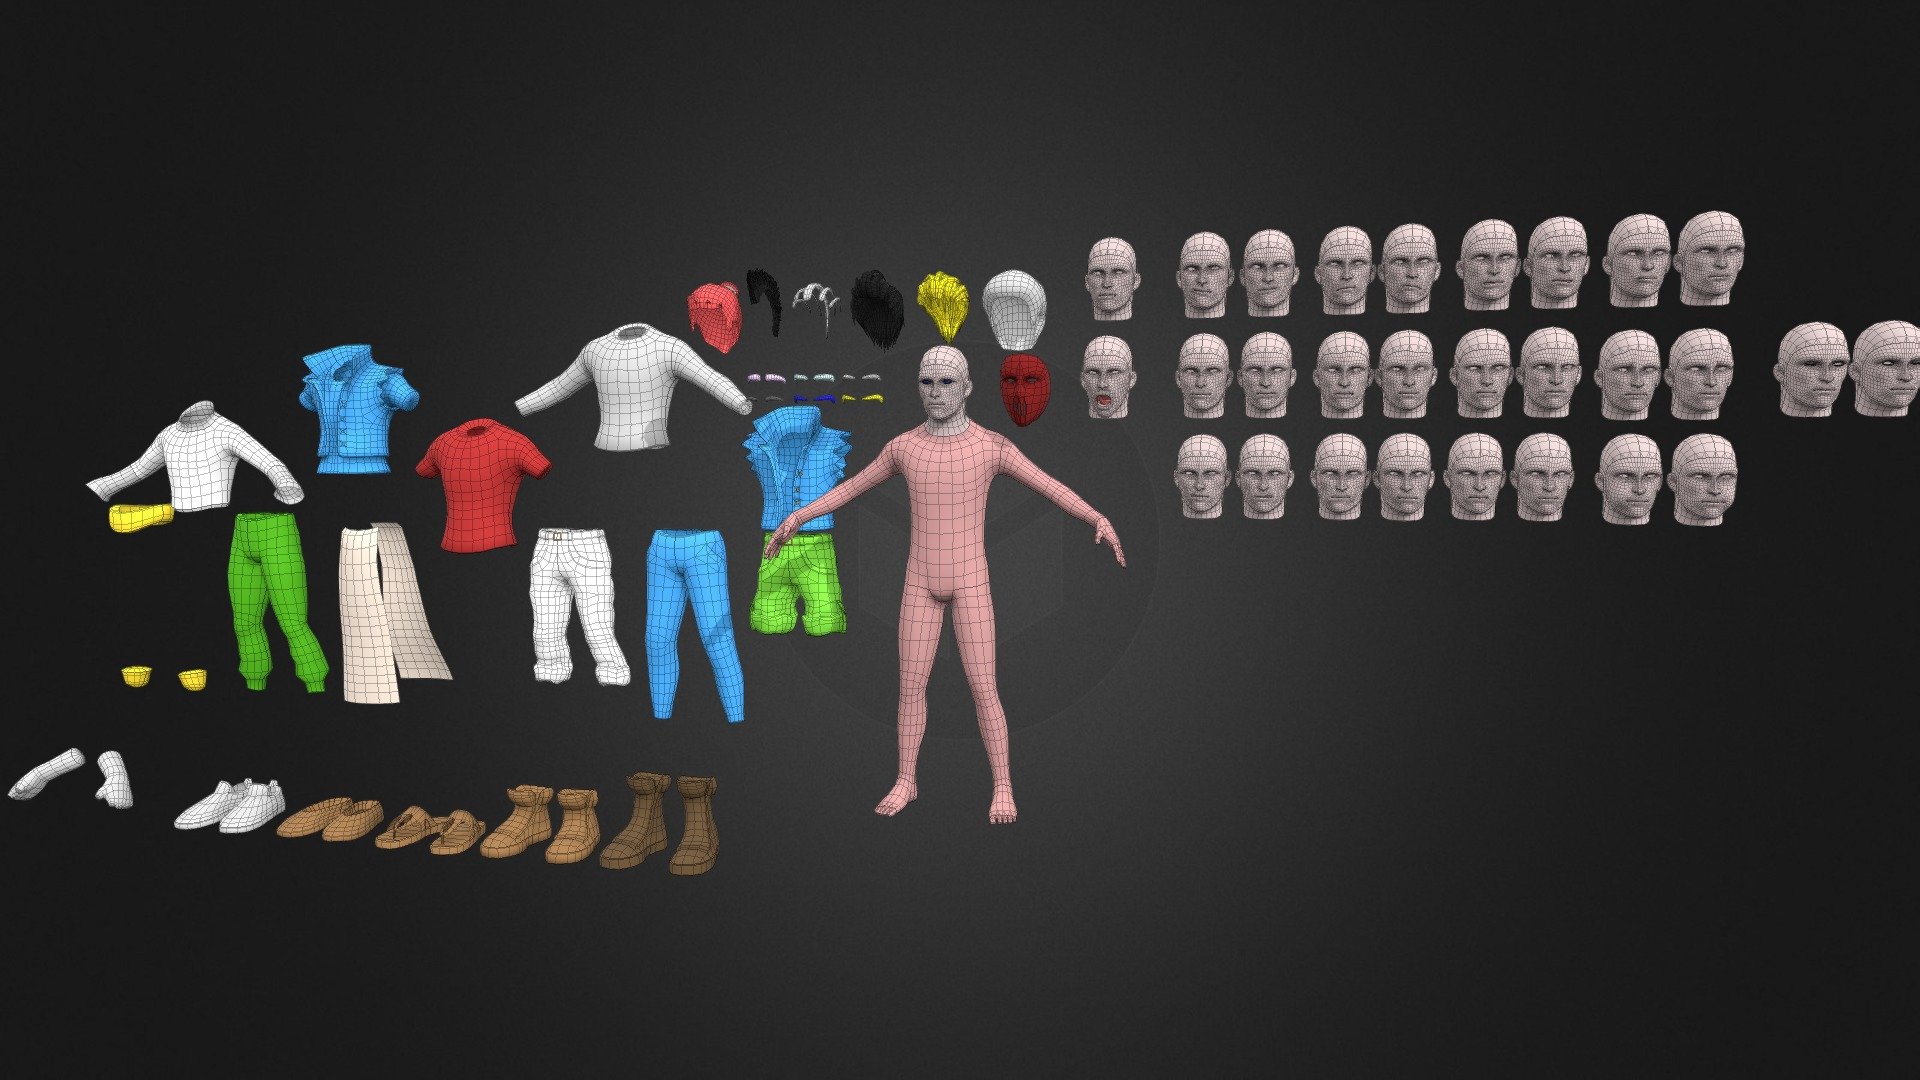 This is a basic model from my videogame DOJO

You will find more information here: https://www.kryptonitestudio.com/project-dojo/ or try demo: https://davidechiarenza.itch.io/dojo

In this file i have put one of 5 character, each of these include various cloathing, eyebrows, hair, face morph.
All elemets are UvMapped, Rigged and animated with Motion Capture suit. you can see the resul on my homepage 3d models.

Software used: 3dsMax, Zbrush, Photoshop, Substance Painter, Gimp, Blender, Percepiton Neuron - Base Model - 3D model by Davide Chiarenza (@IlTurco) 3d model